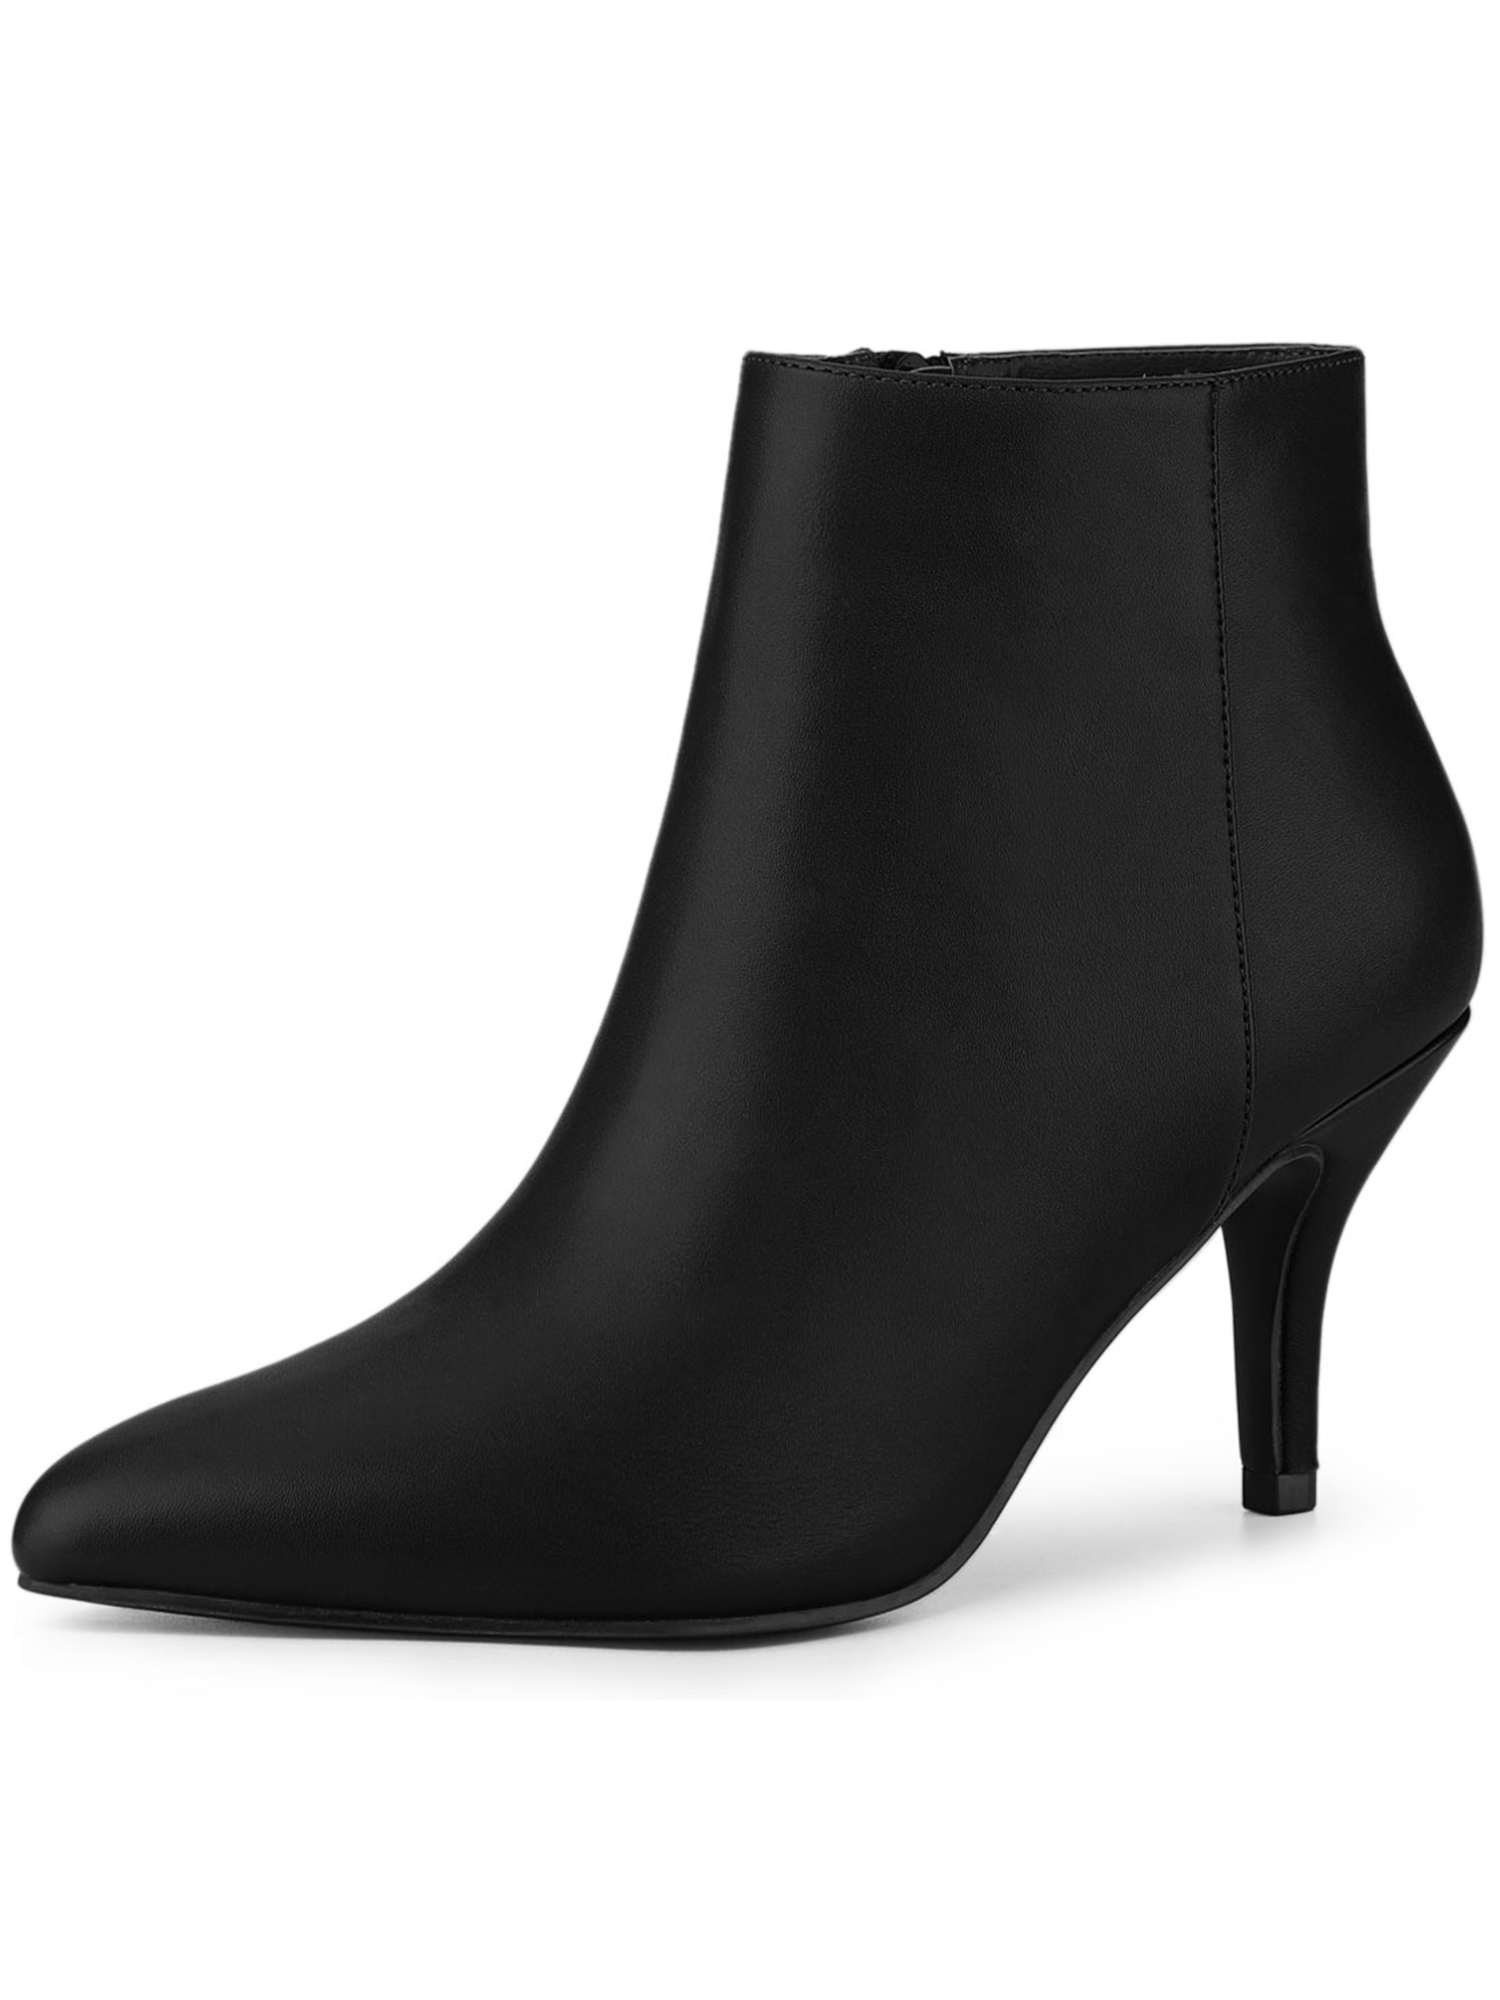 Details about  / Women/'s Ladies High Heel Pointy Toe Stilettos Ankle Boots Pumps Party Outdoor L